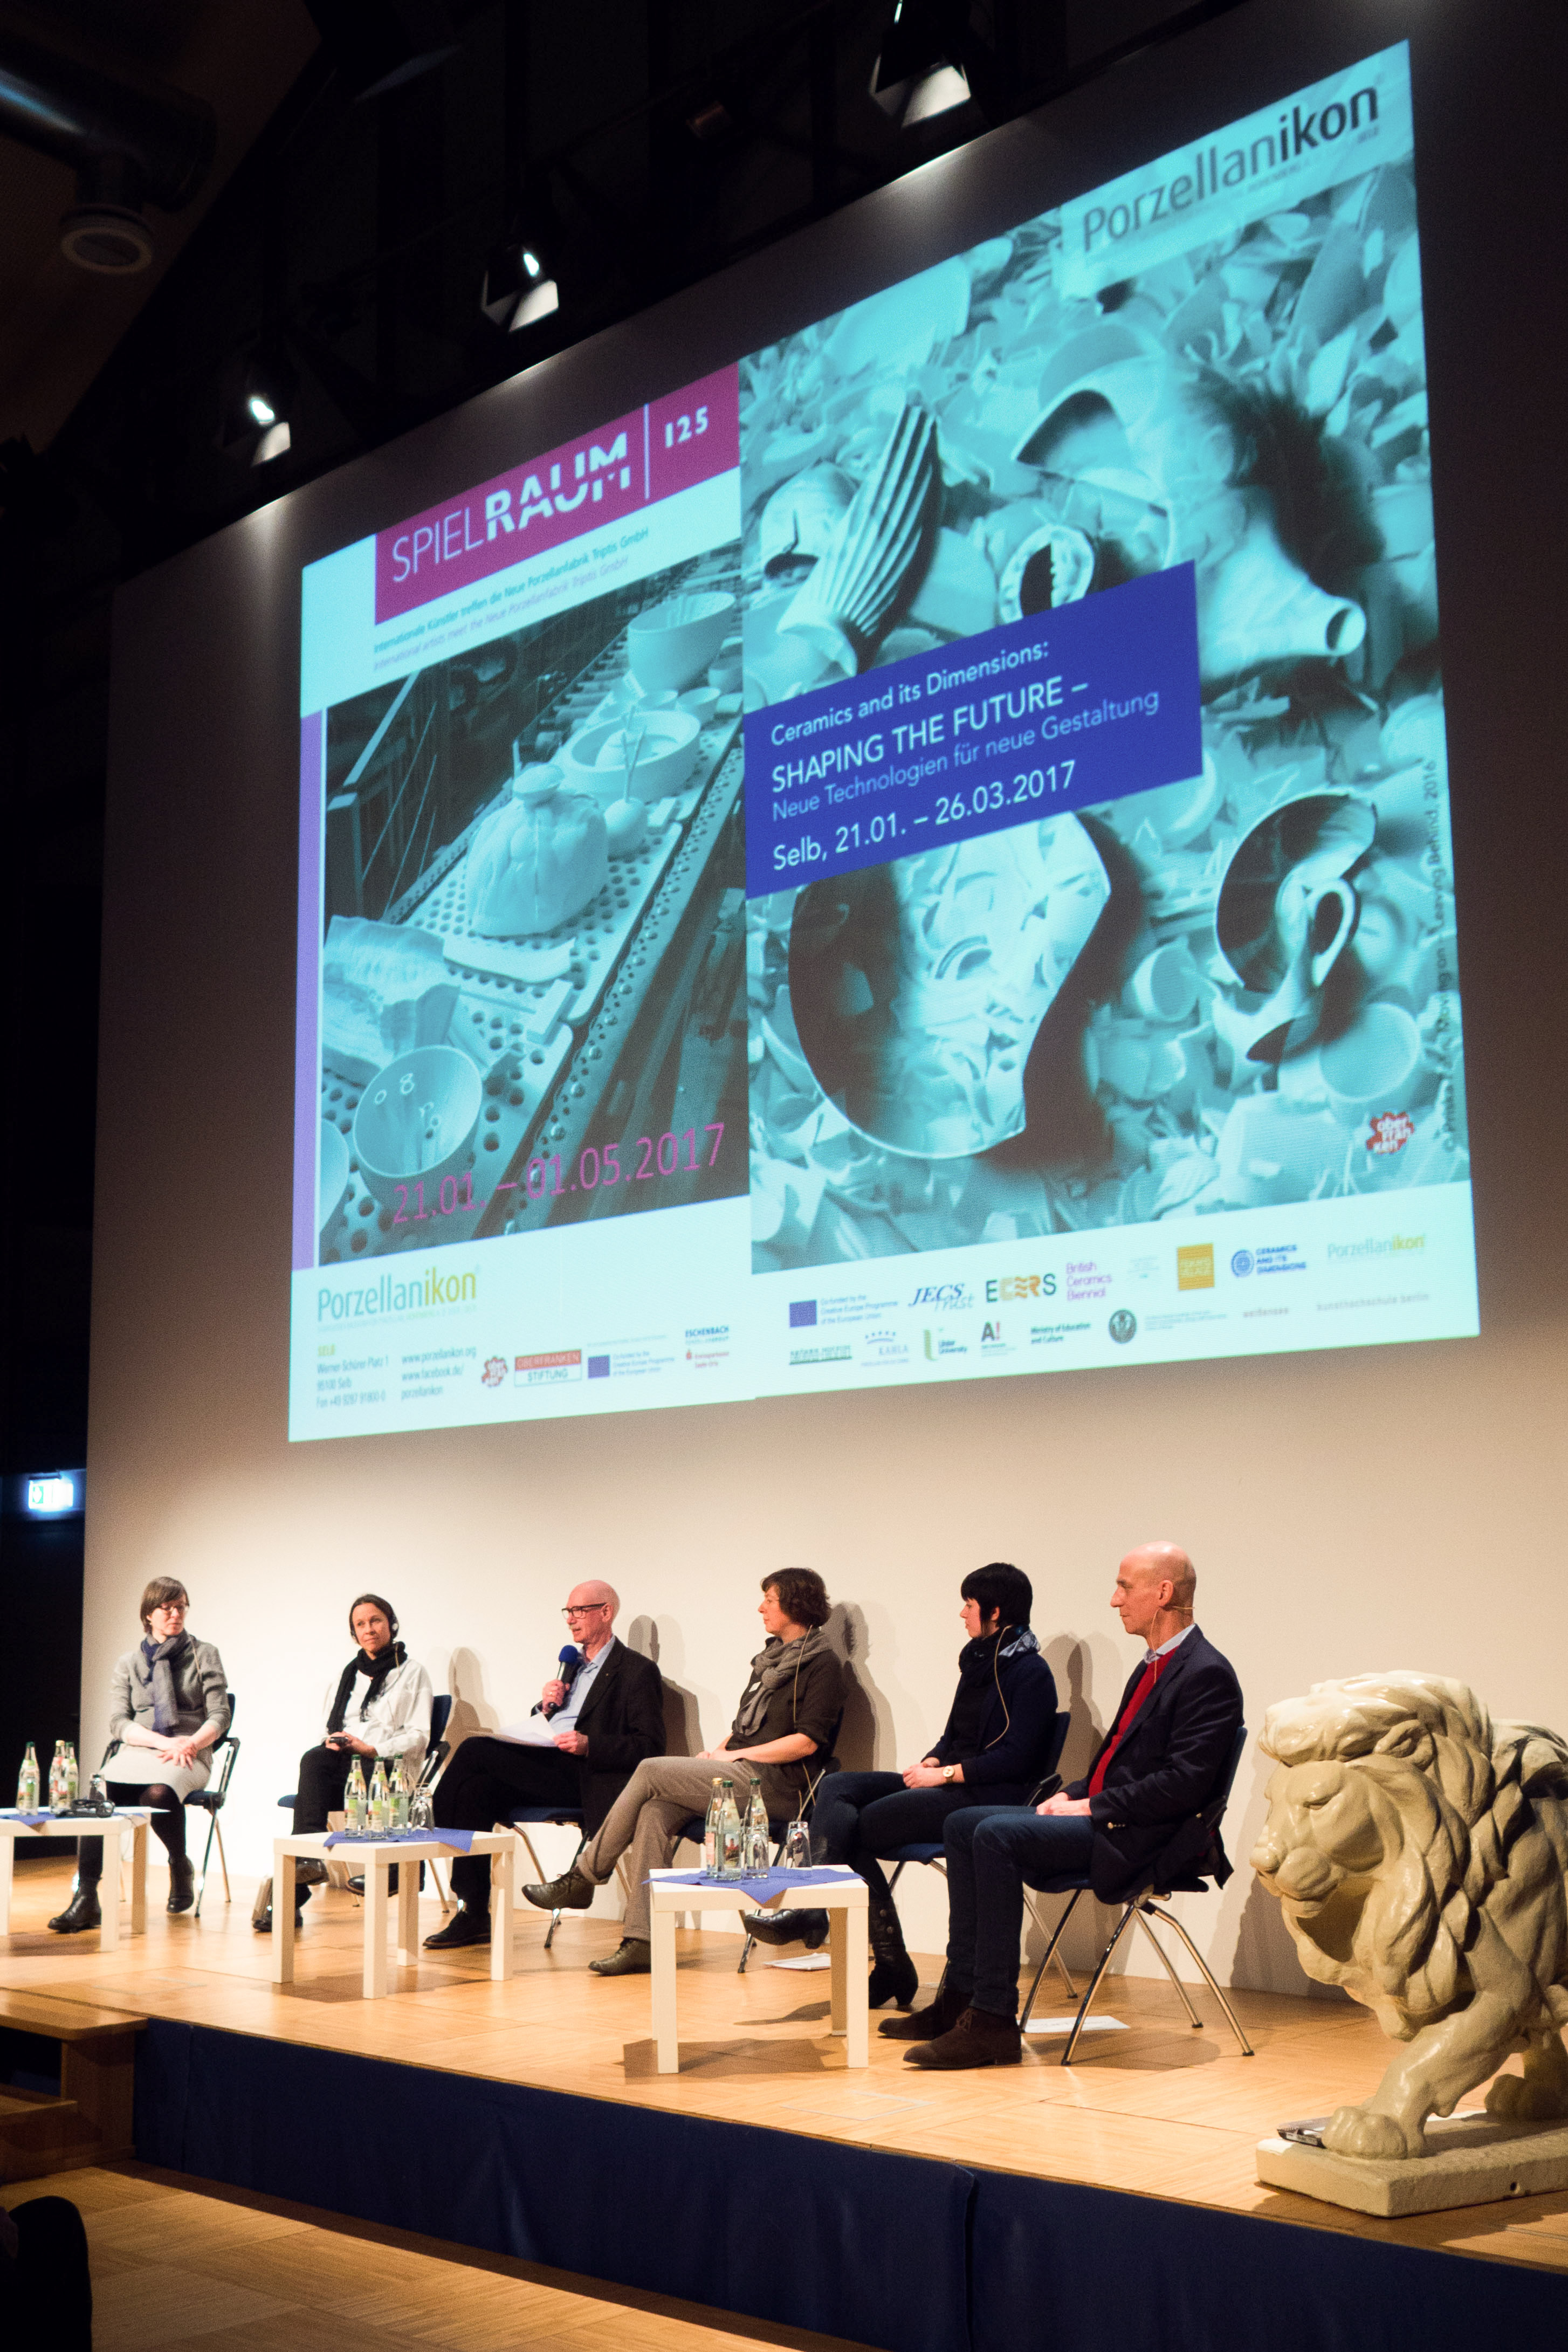 The Round Table panel discussion in the auditorium of Porzellanikon.